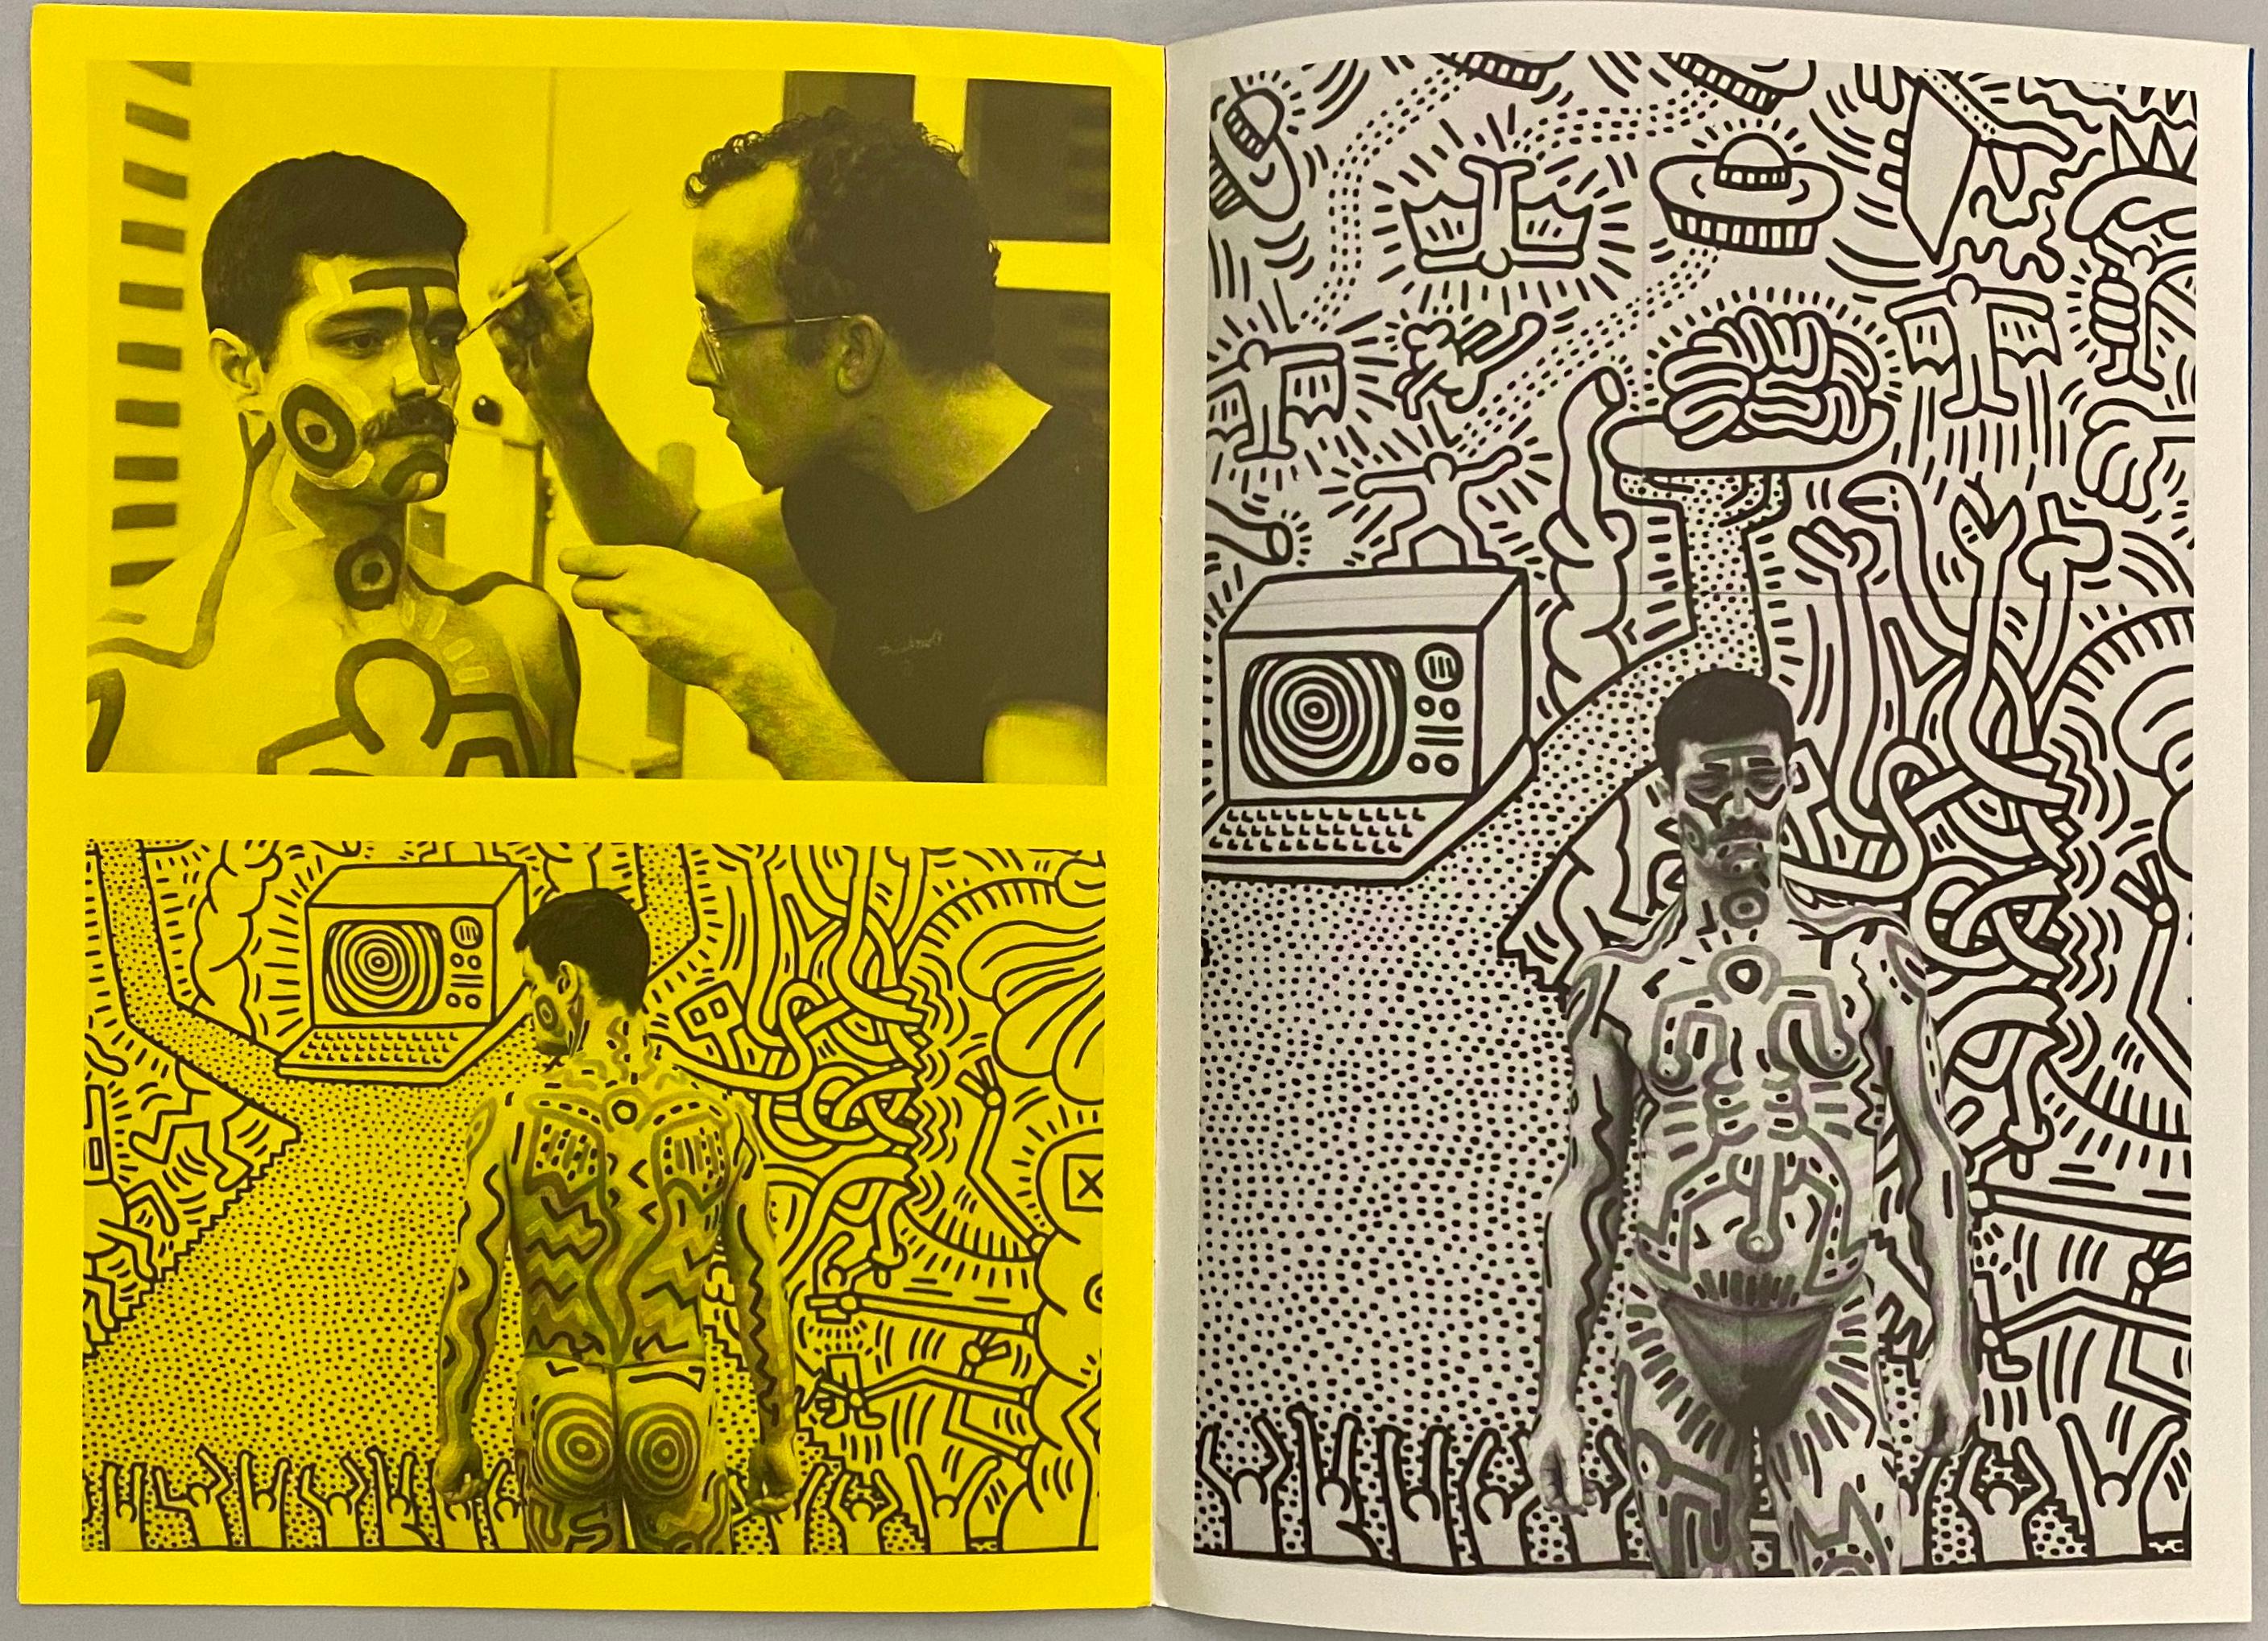 Original Keith Haring at Paul Maenz Catalog, 1984. First edition:

Rare vintage catalog produced during Keith Haring’s lifetime. A 1984 show which marked Haring’s 1st solo exhibition in Germany. Beautifully illustrated; very nice condition. Quite